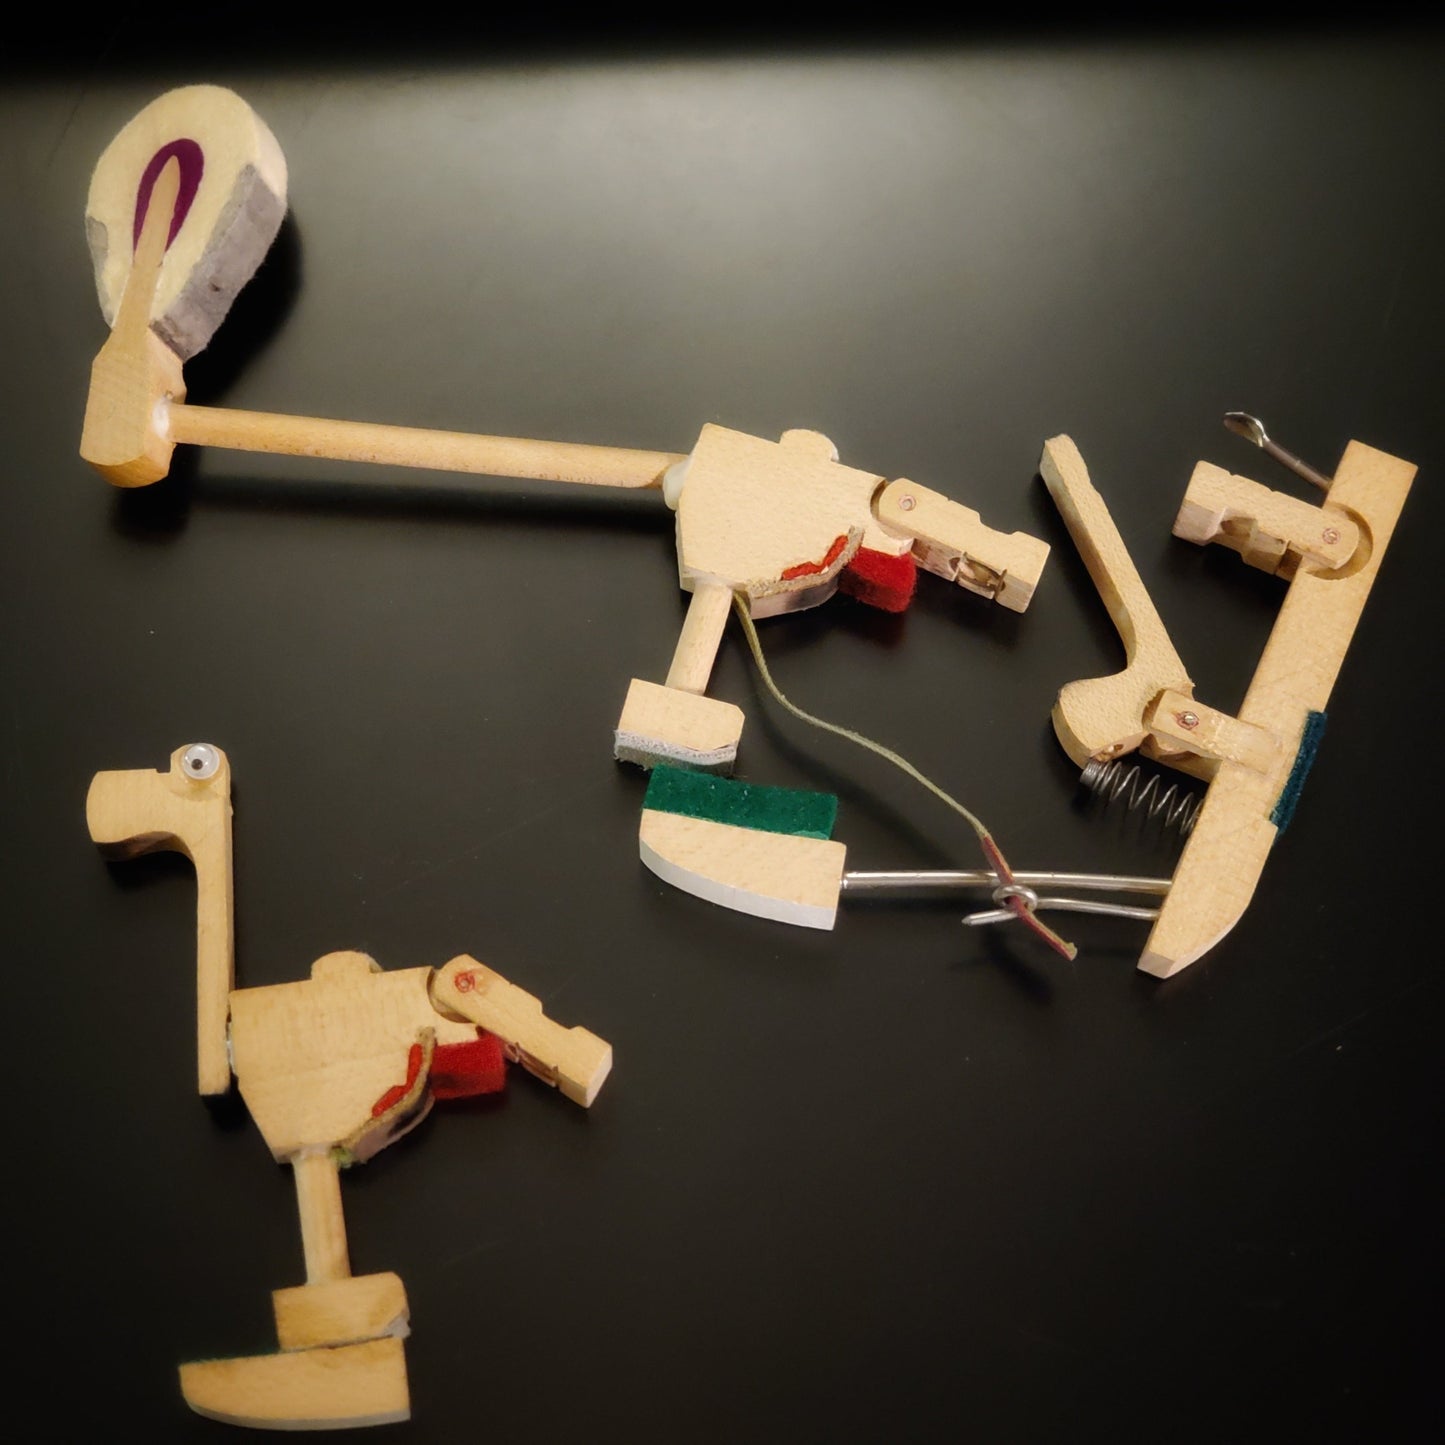 a magnet in the shape of a dinosaur-like animal made from pieces of a piano mechanism - above are the pieces of piano mechanism  like those from which it was made